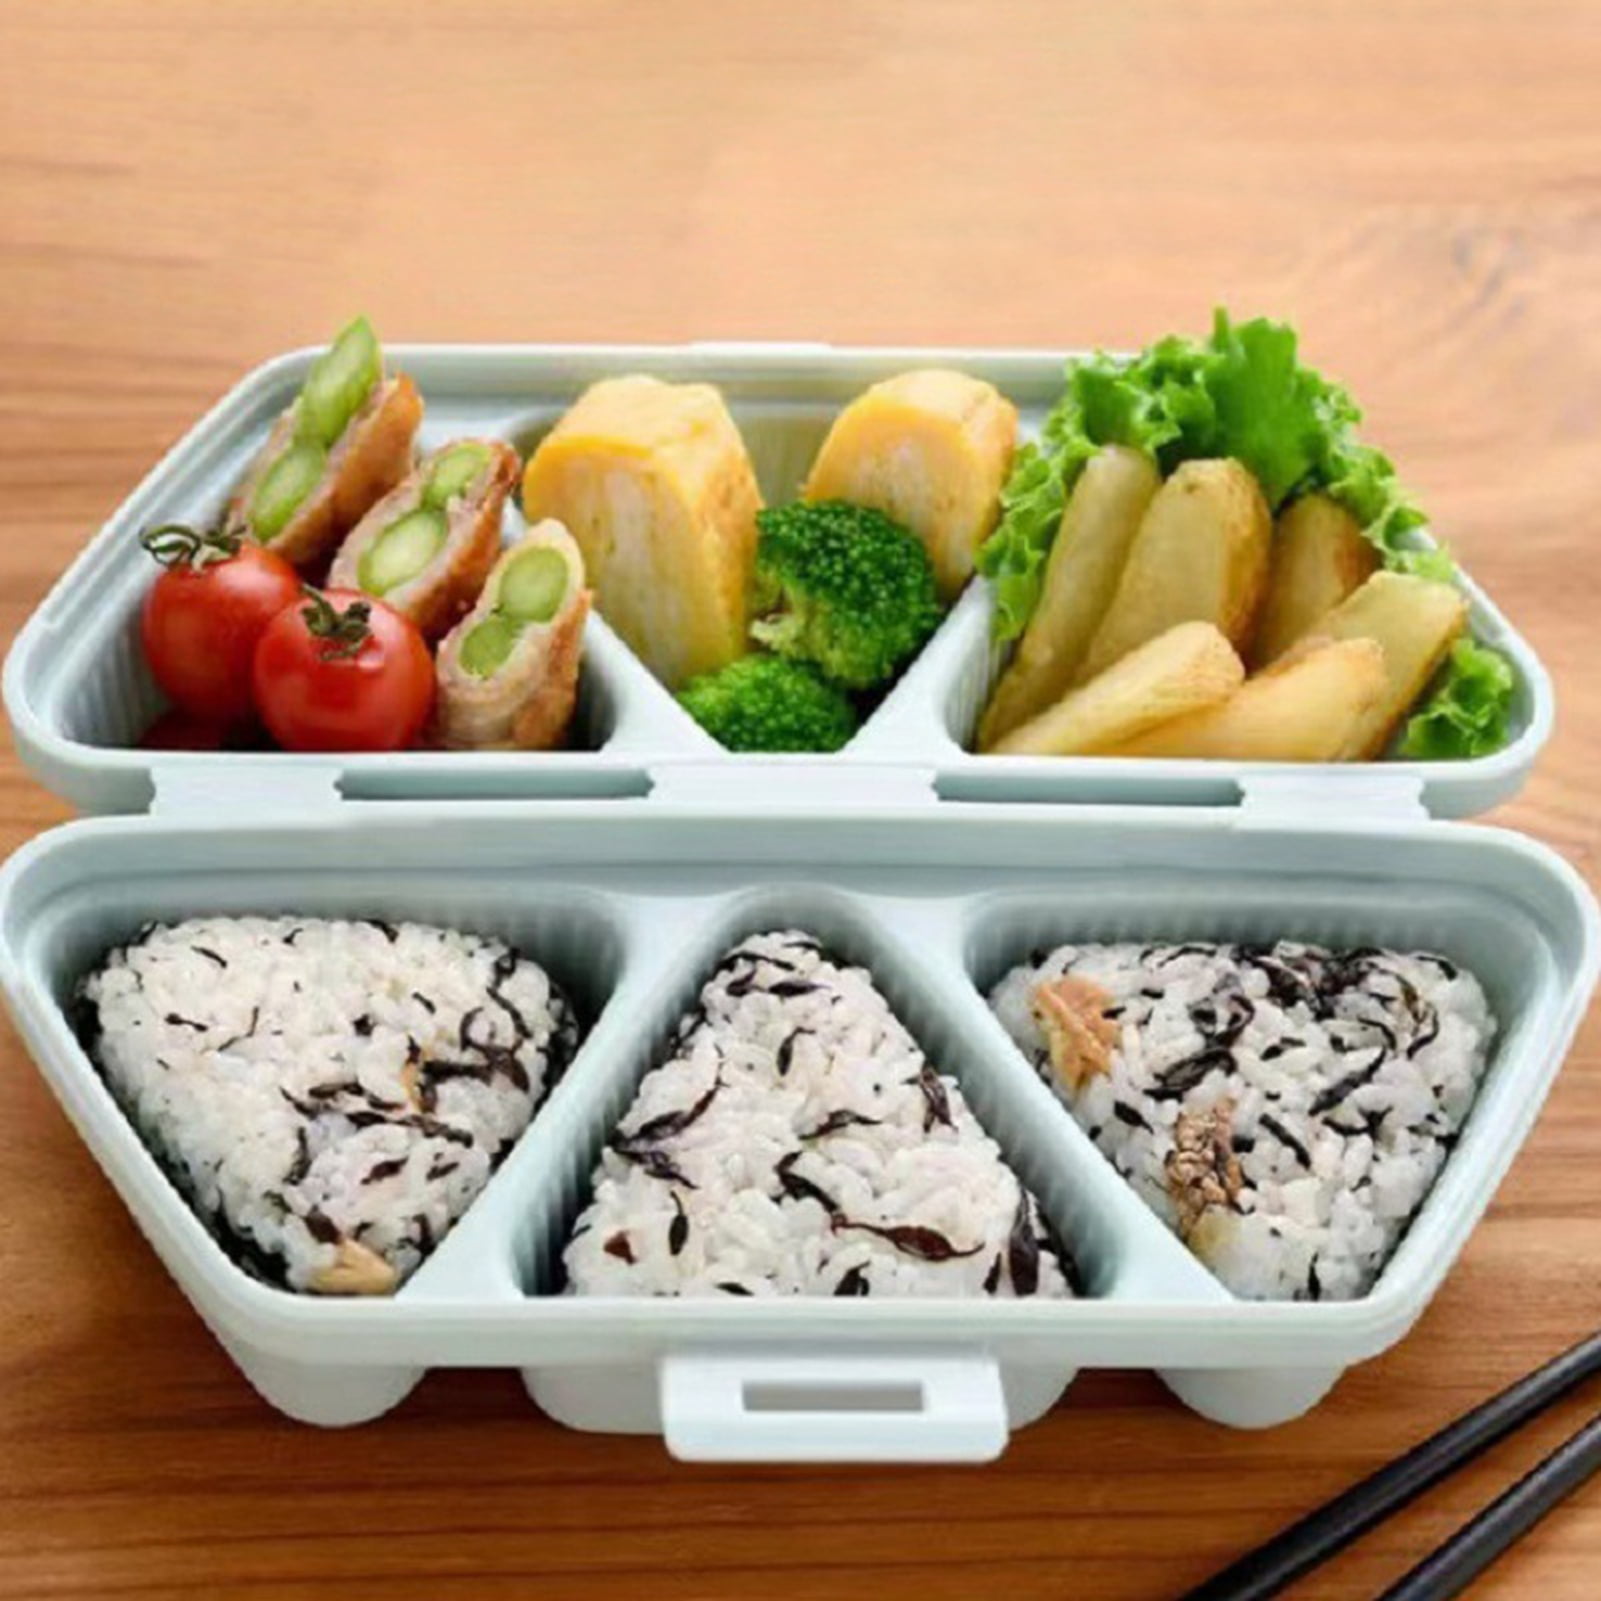 Weico 2 Packs Sushi Roller Rice Roll Mold Bento Maker Mould Kitchen Tools Kit Gadget, Size: Please Ref to Pics, Other